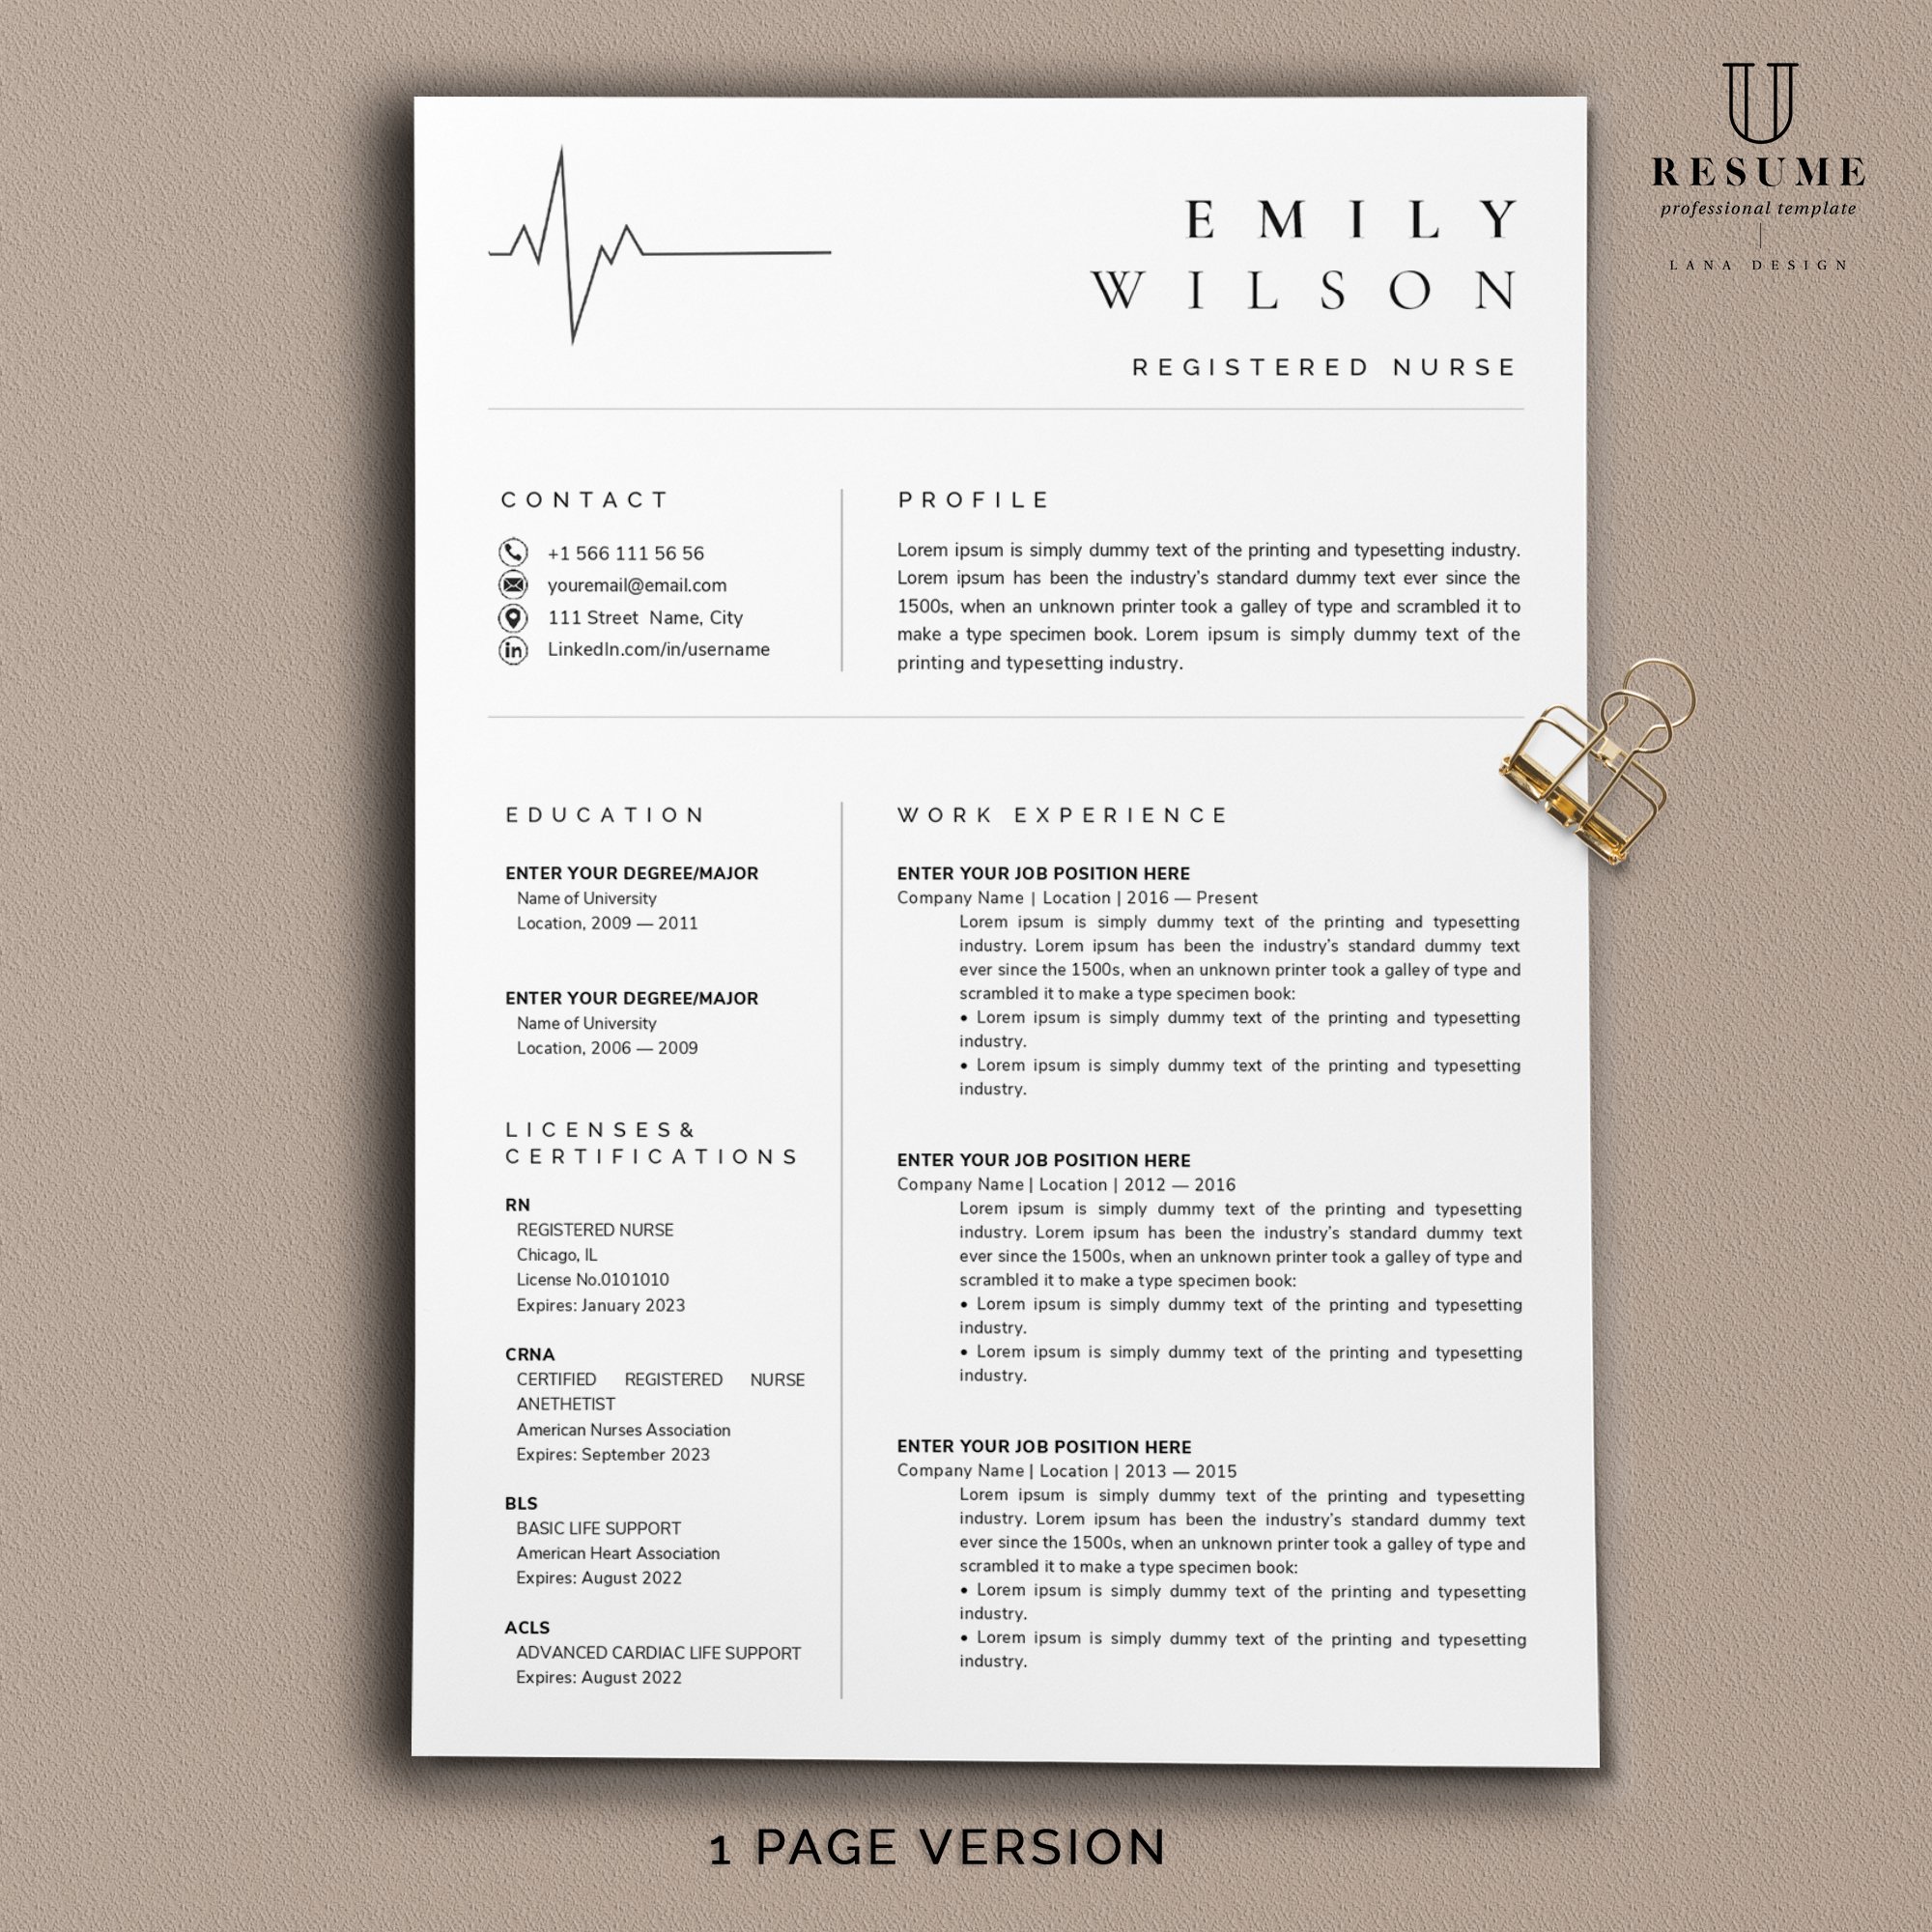 Professional resume template with a key on top of it.